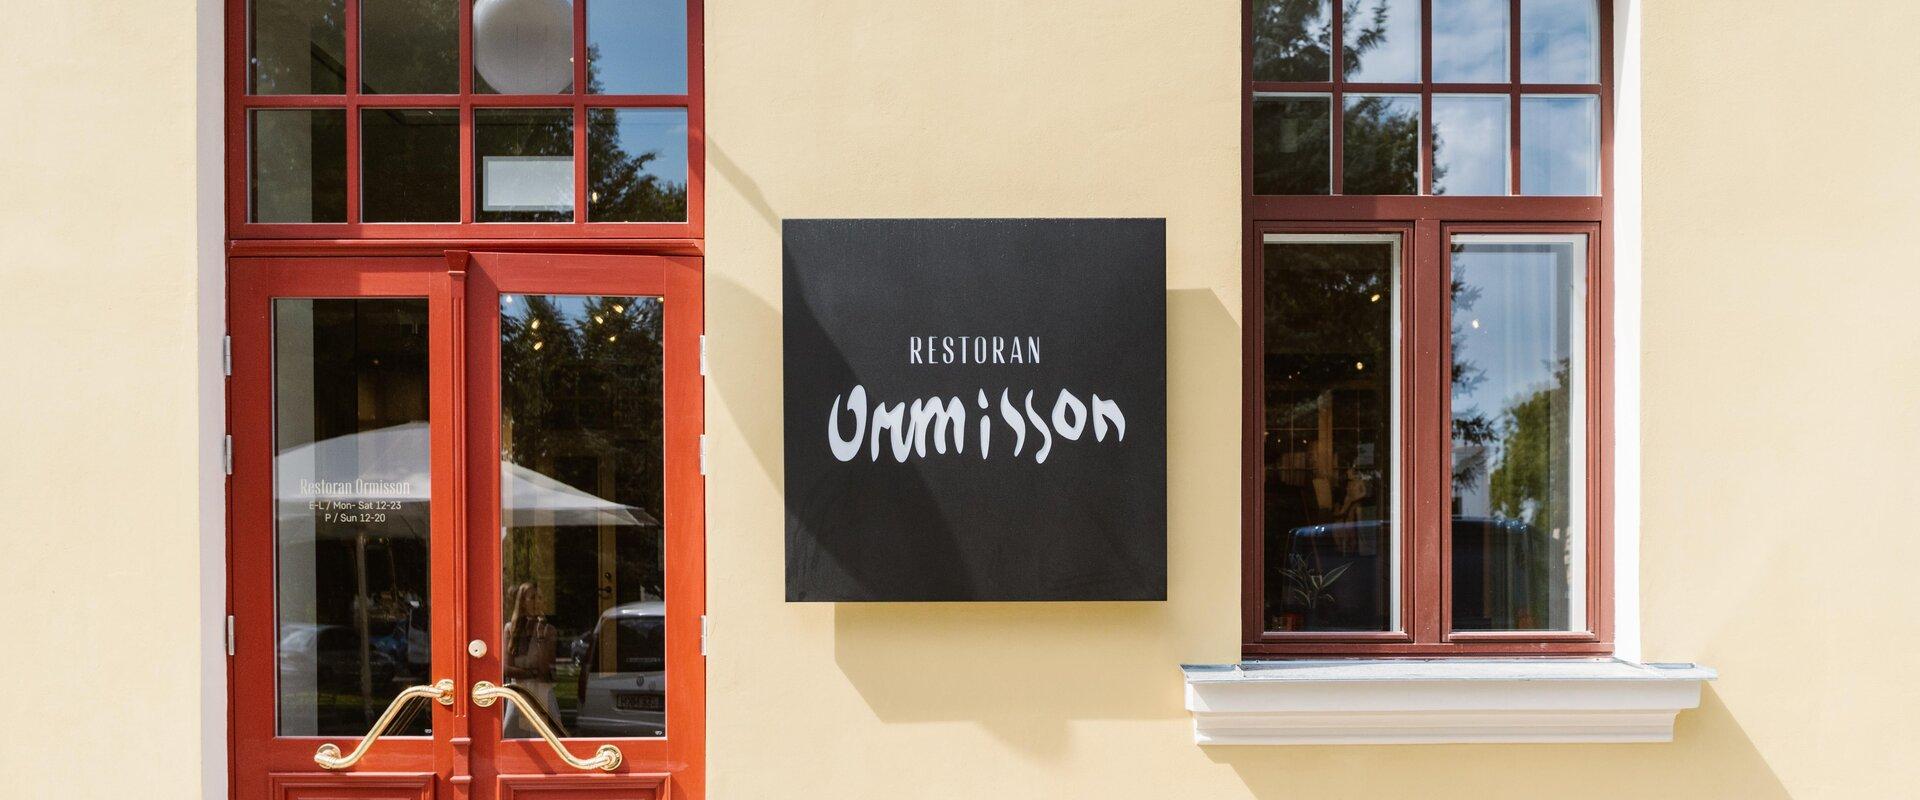 Restaurant Ormisson was named after Villem Ormisson, the son of Andreas Ormisson – the founder of the Park Hotel Viljandi building. Villem was a paint